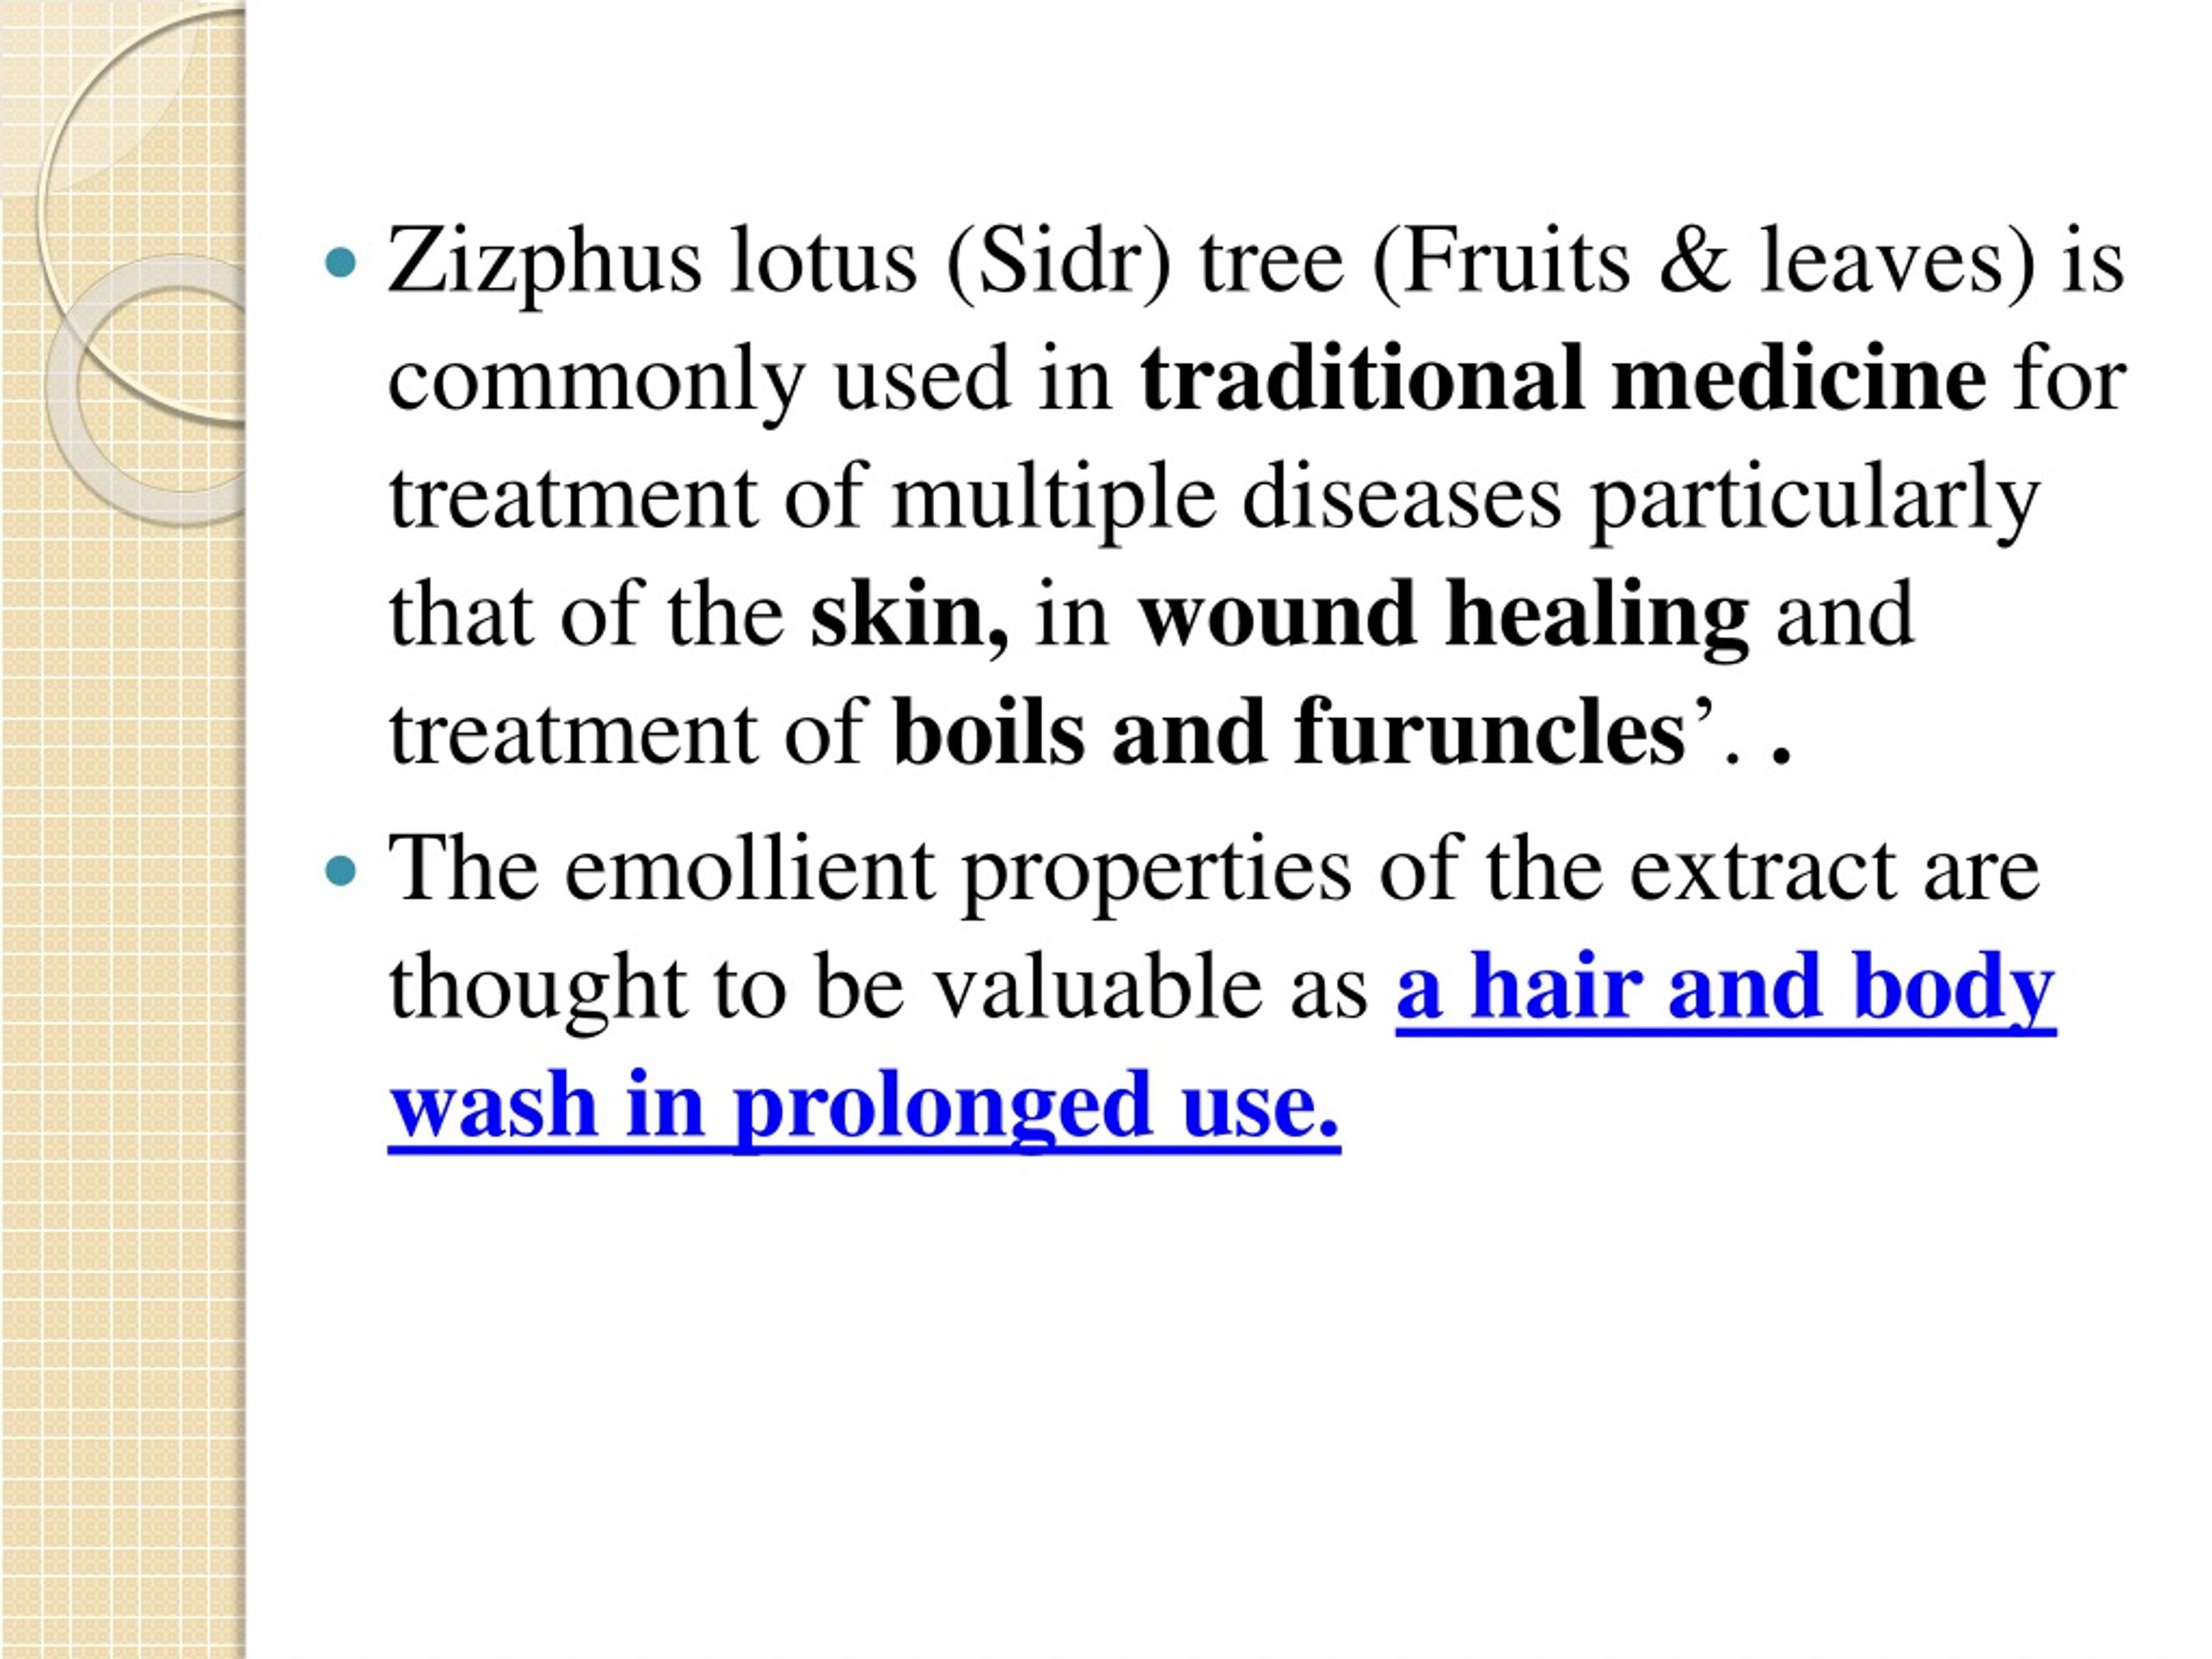 Ppt Biosafty Of Ziziphus Lotus Extract As Hair And Body Wash An